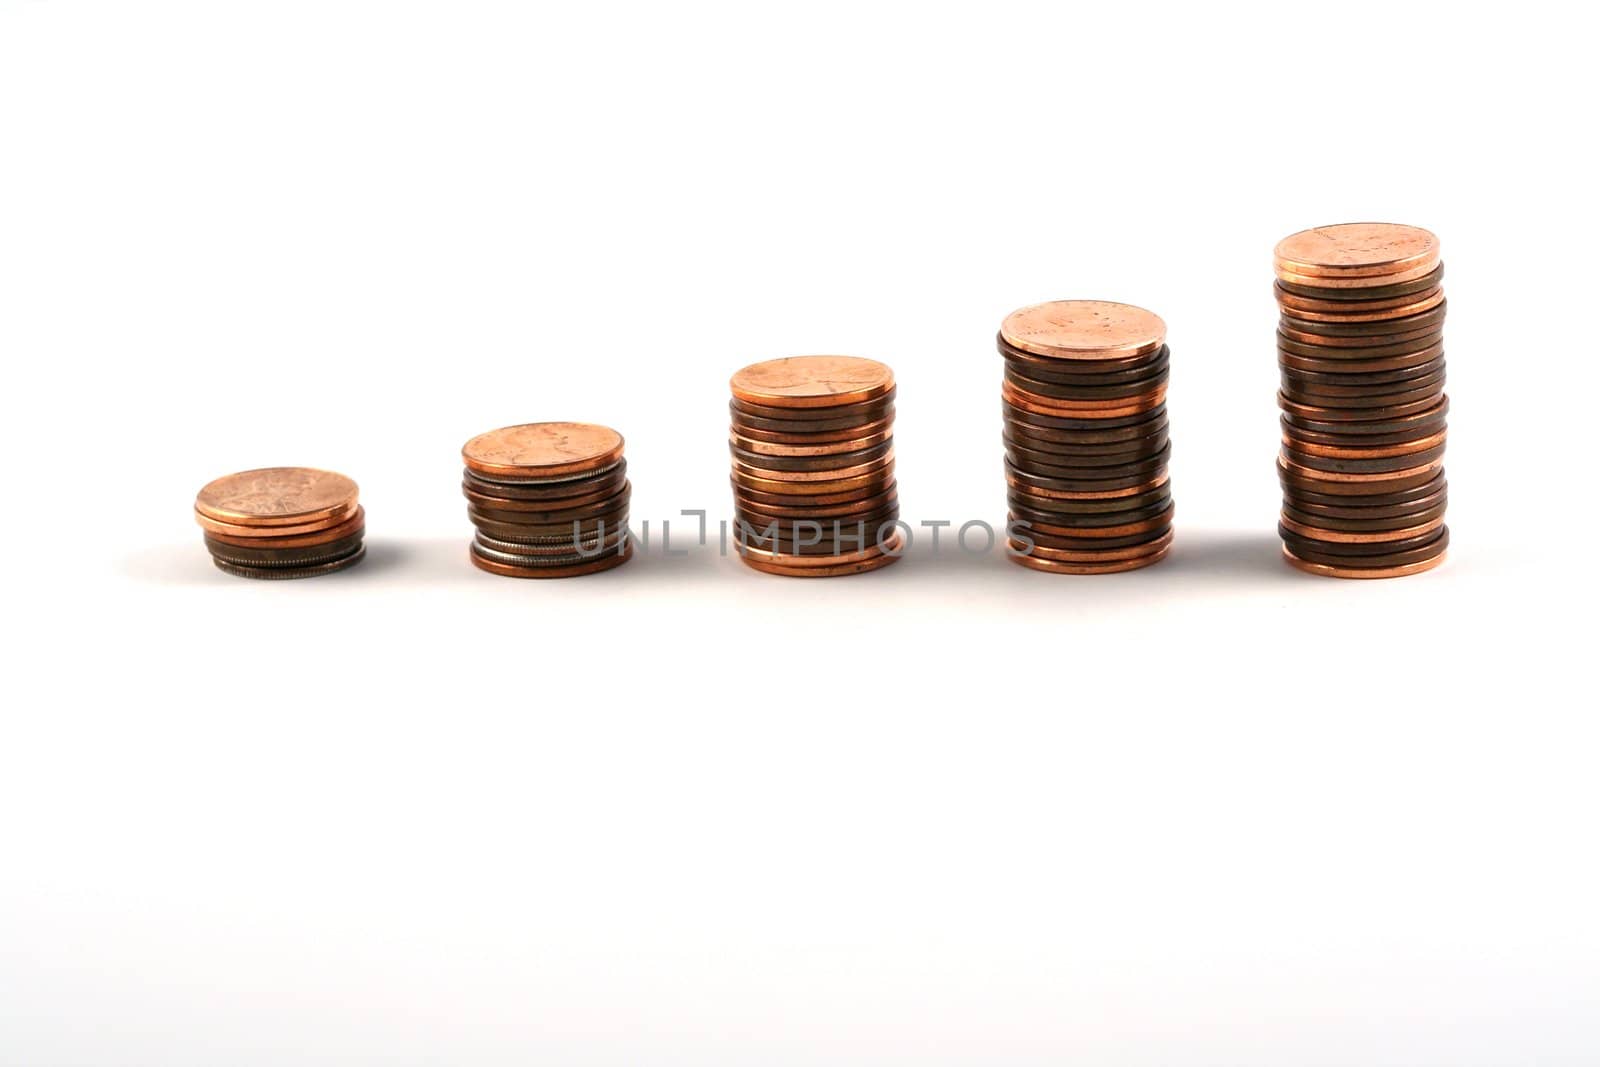 Ladder of coins, business/finance concept